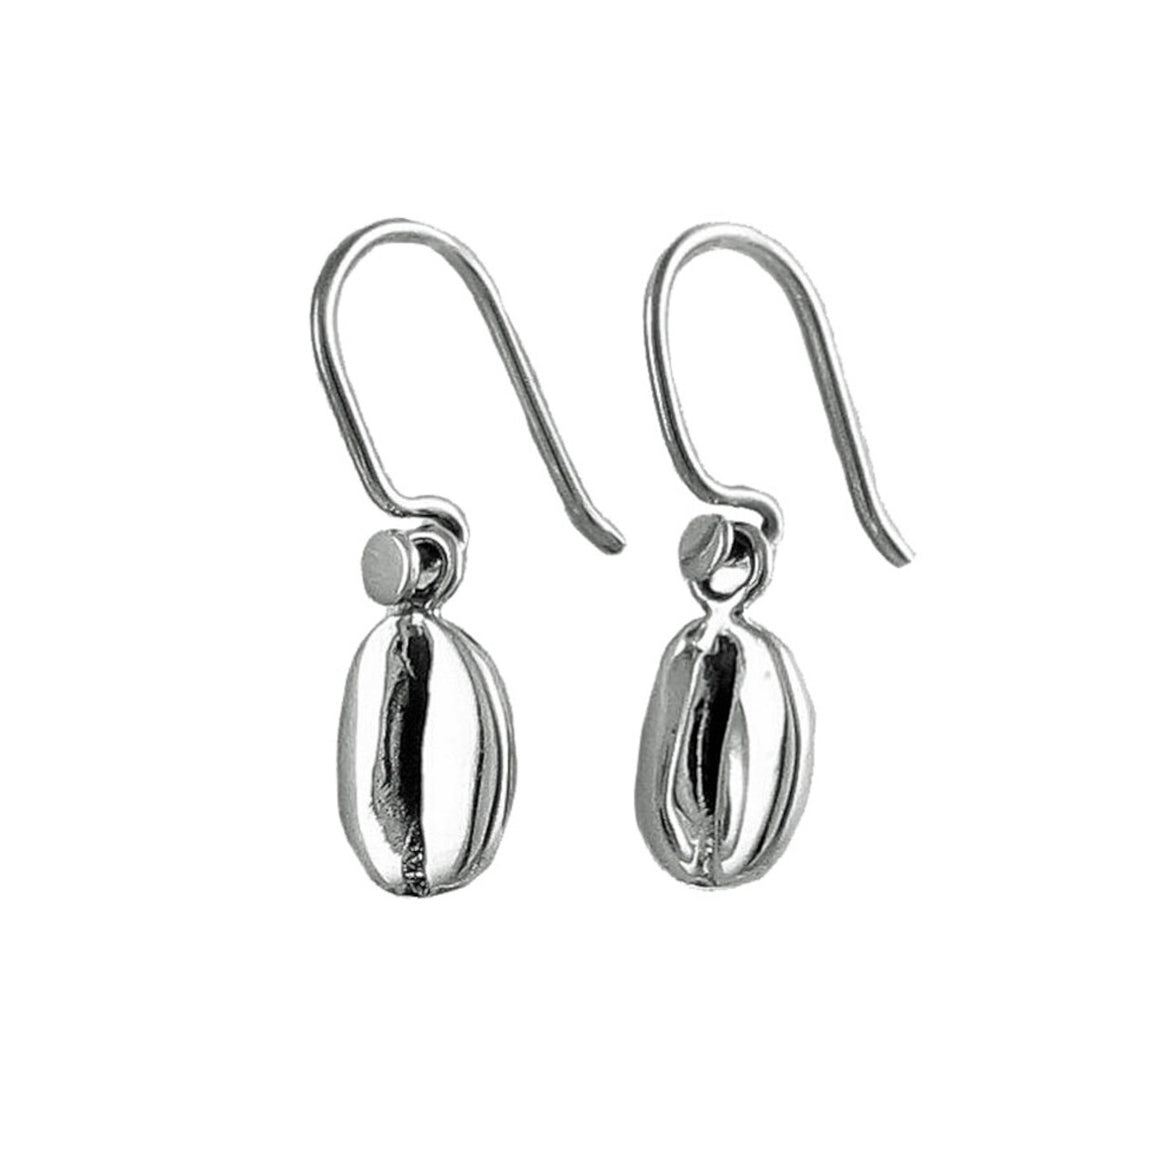 Women's Earrings | Handmade Silver Jewellery & The Mexican Collection